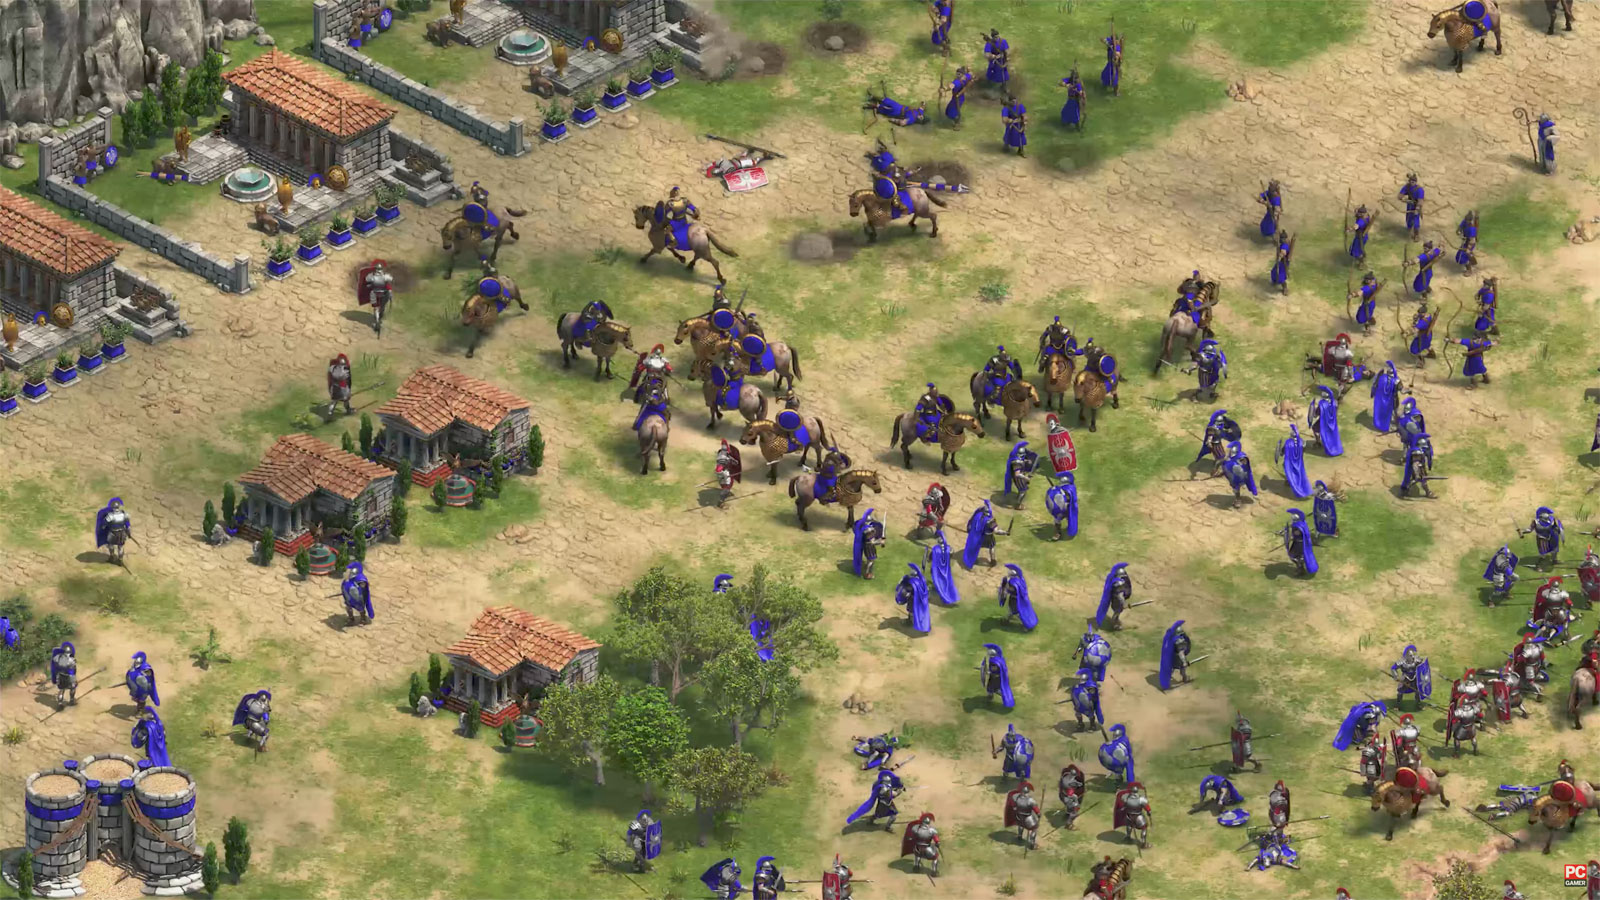 Age of Empires 4 coming from Relic Entertainment, first